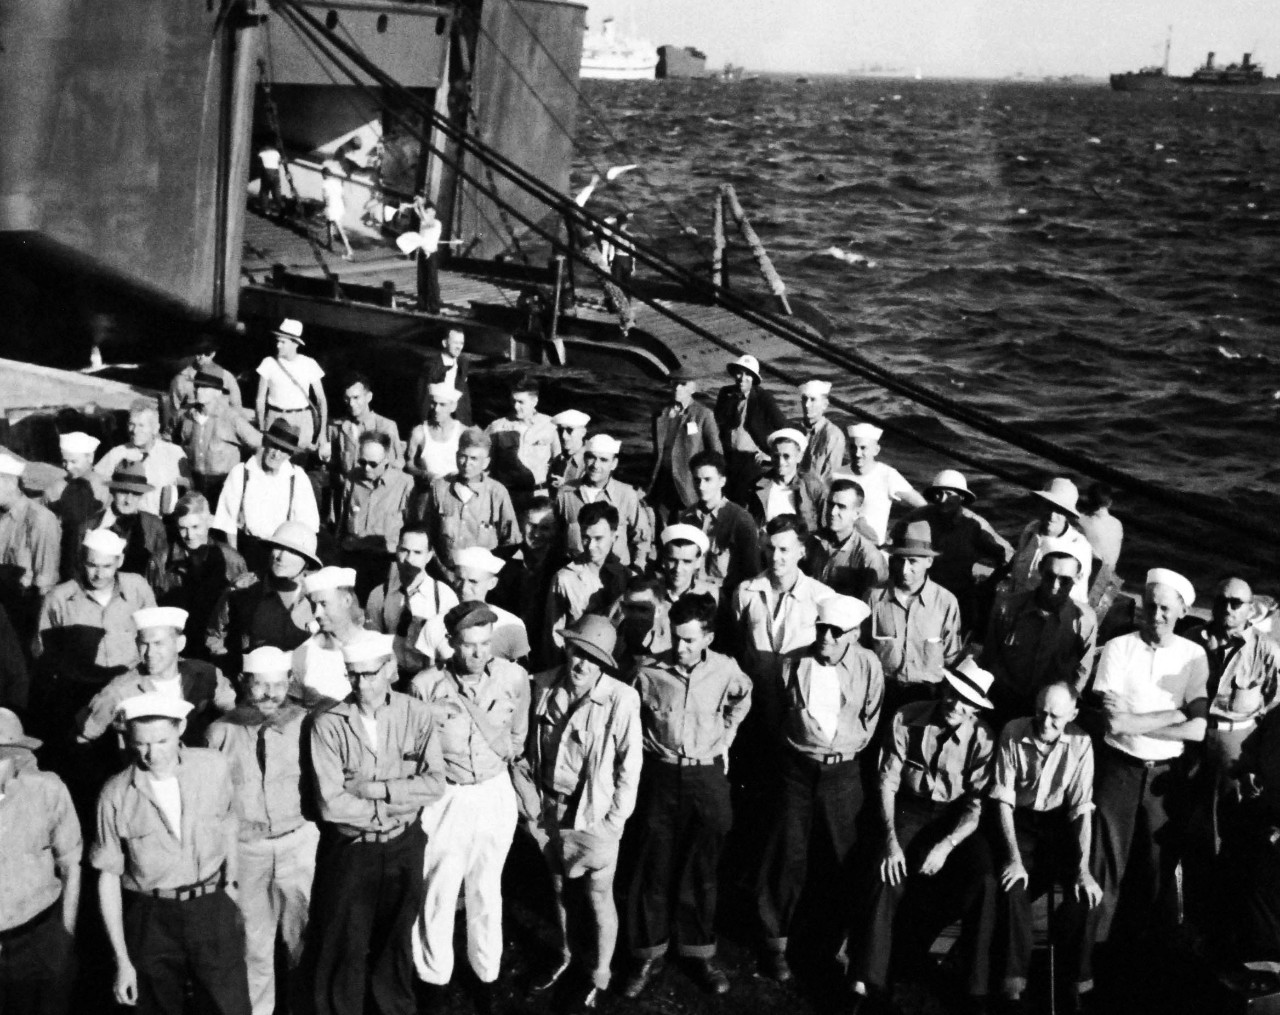 80-G-495640:   Prisoner of War Camp, Japan, 1945.    Former Prisoners of War preparing to leave Yokosuka, Japan, for the United States.   The prisoners of war line up at the dock.   Photograph released September 19, 1945.  Official U.S. Navy photograph, now in the collections of the National Archives.  (2014/05/29).    The original is a small photograph.   